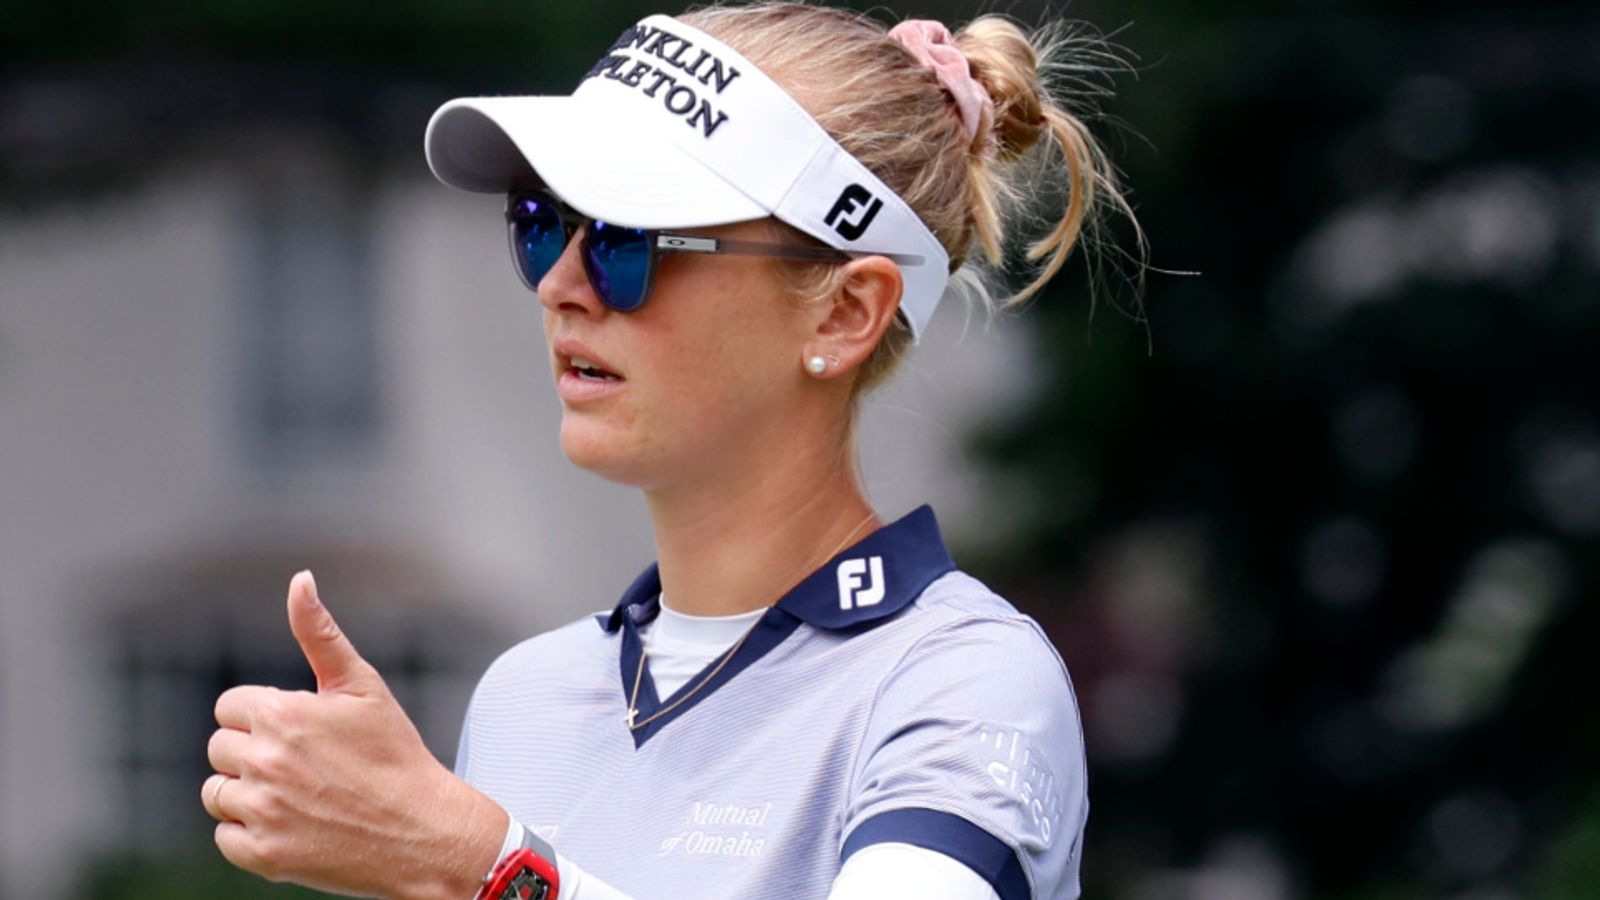 Aramco Team Series: Jessica Korda cards three eagles to open up five-shot lead in Sotogrande